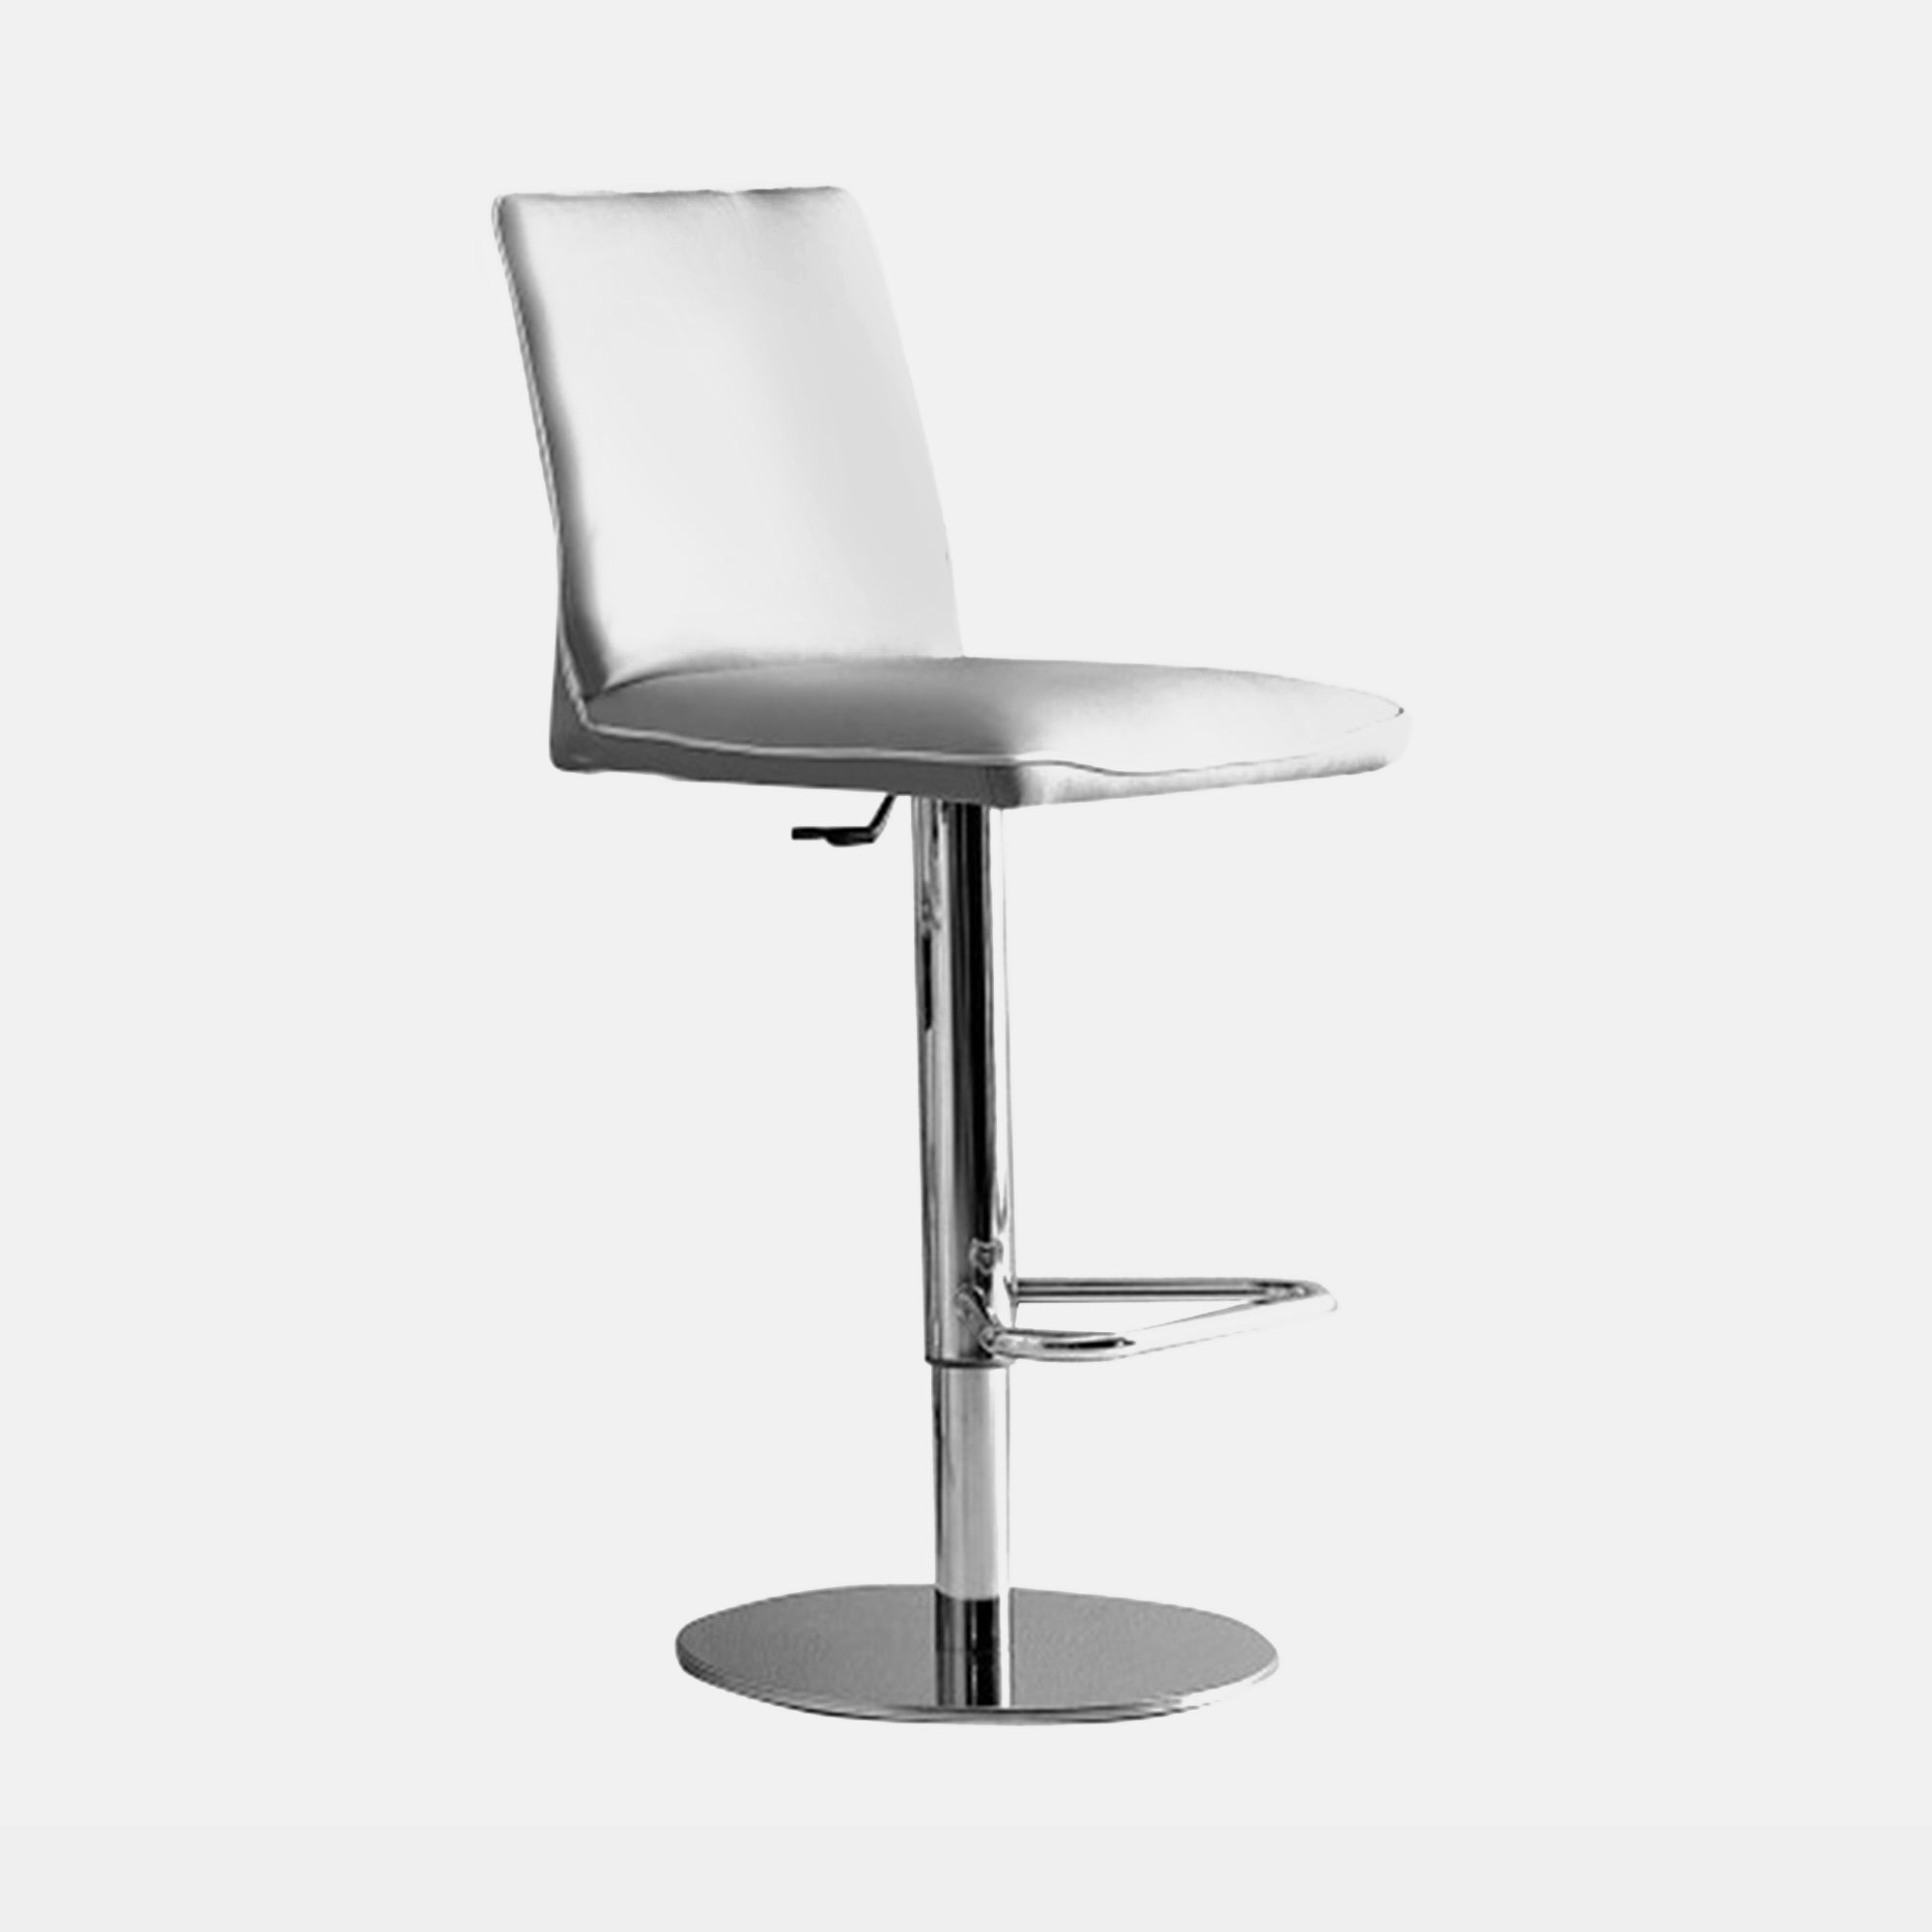 34.37 Barstool Swivel Height Adjustable Chrome G093 in Eco Leather with Matching Piping